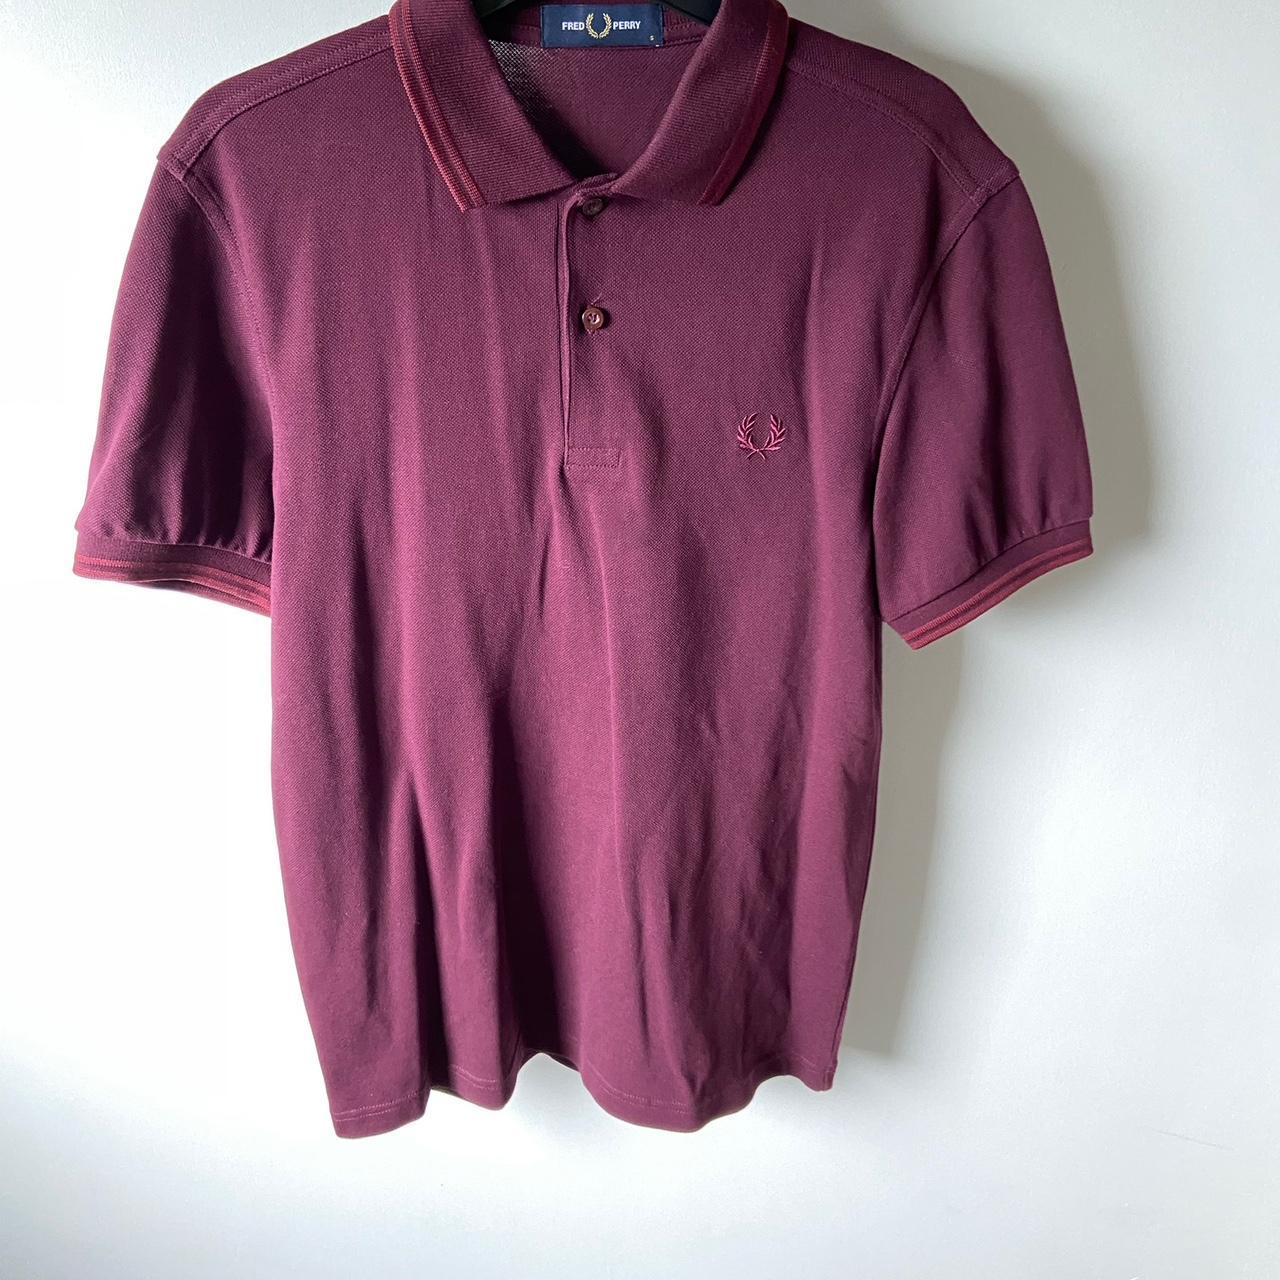 Fred Perry polo Only worn once Small #FredPerry... - Depop